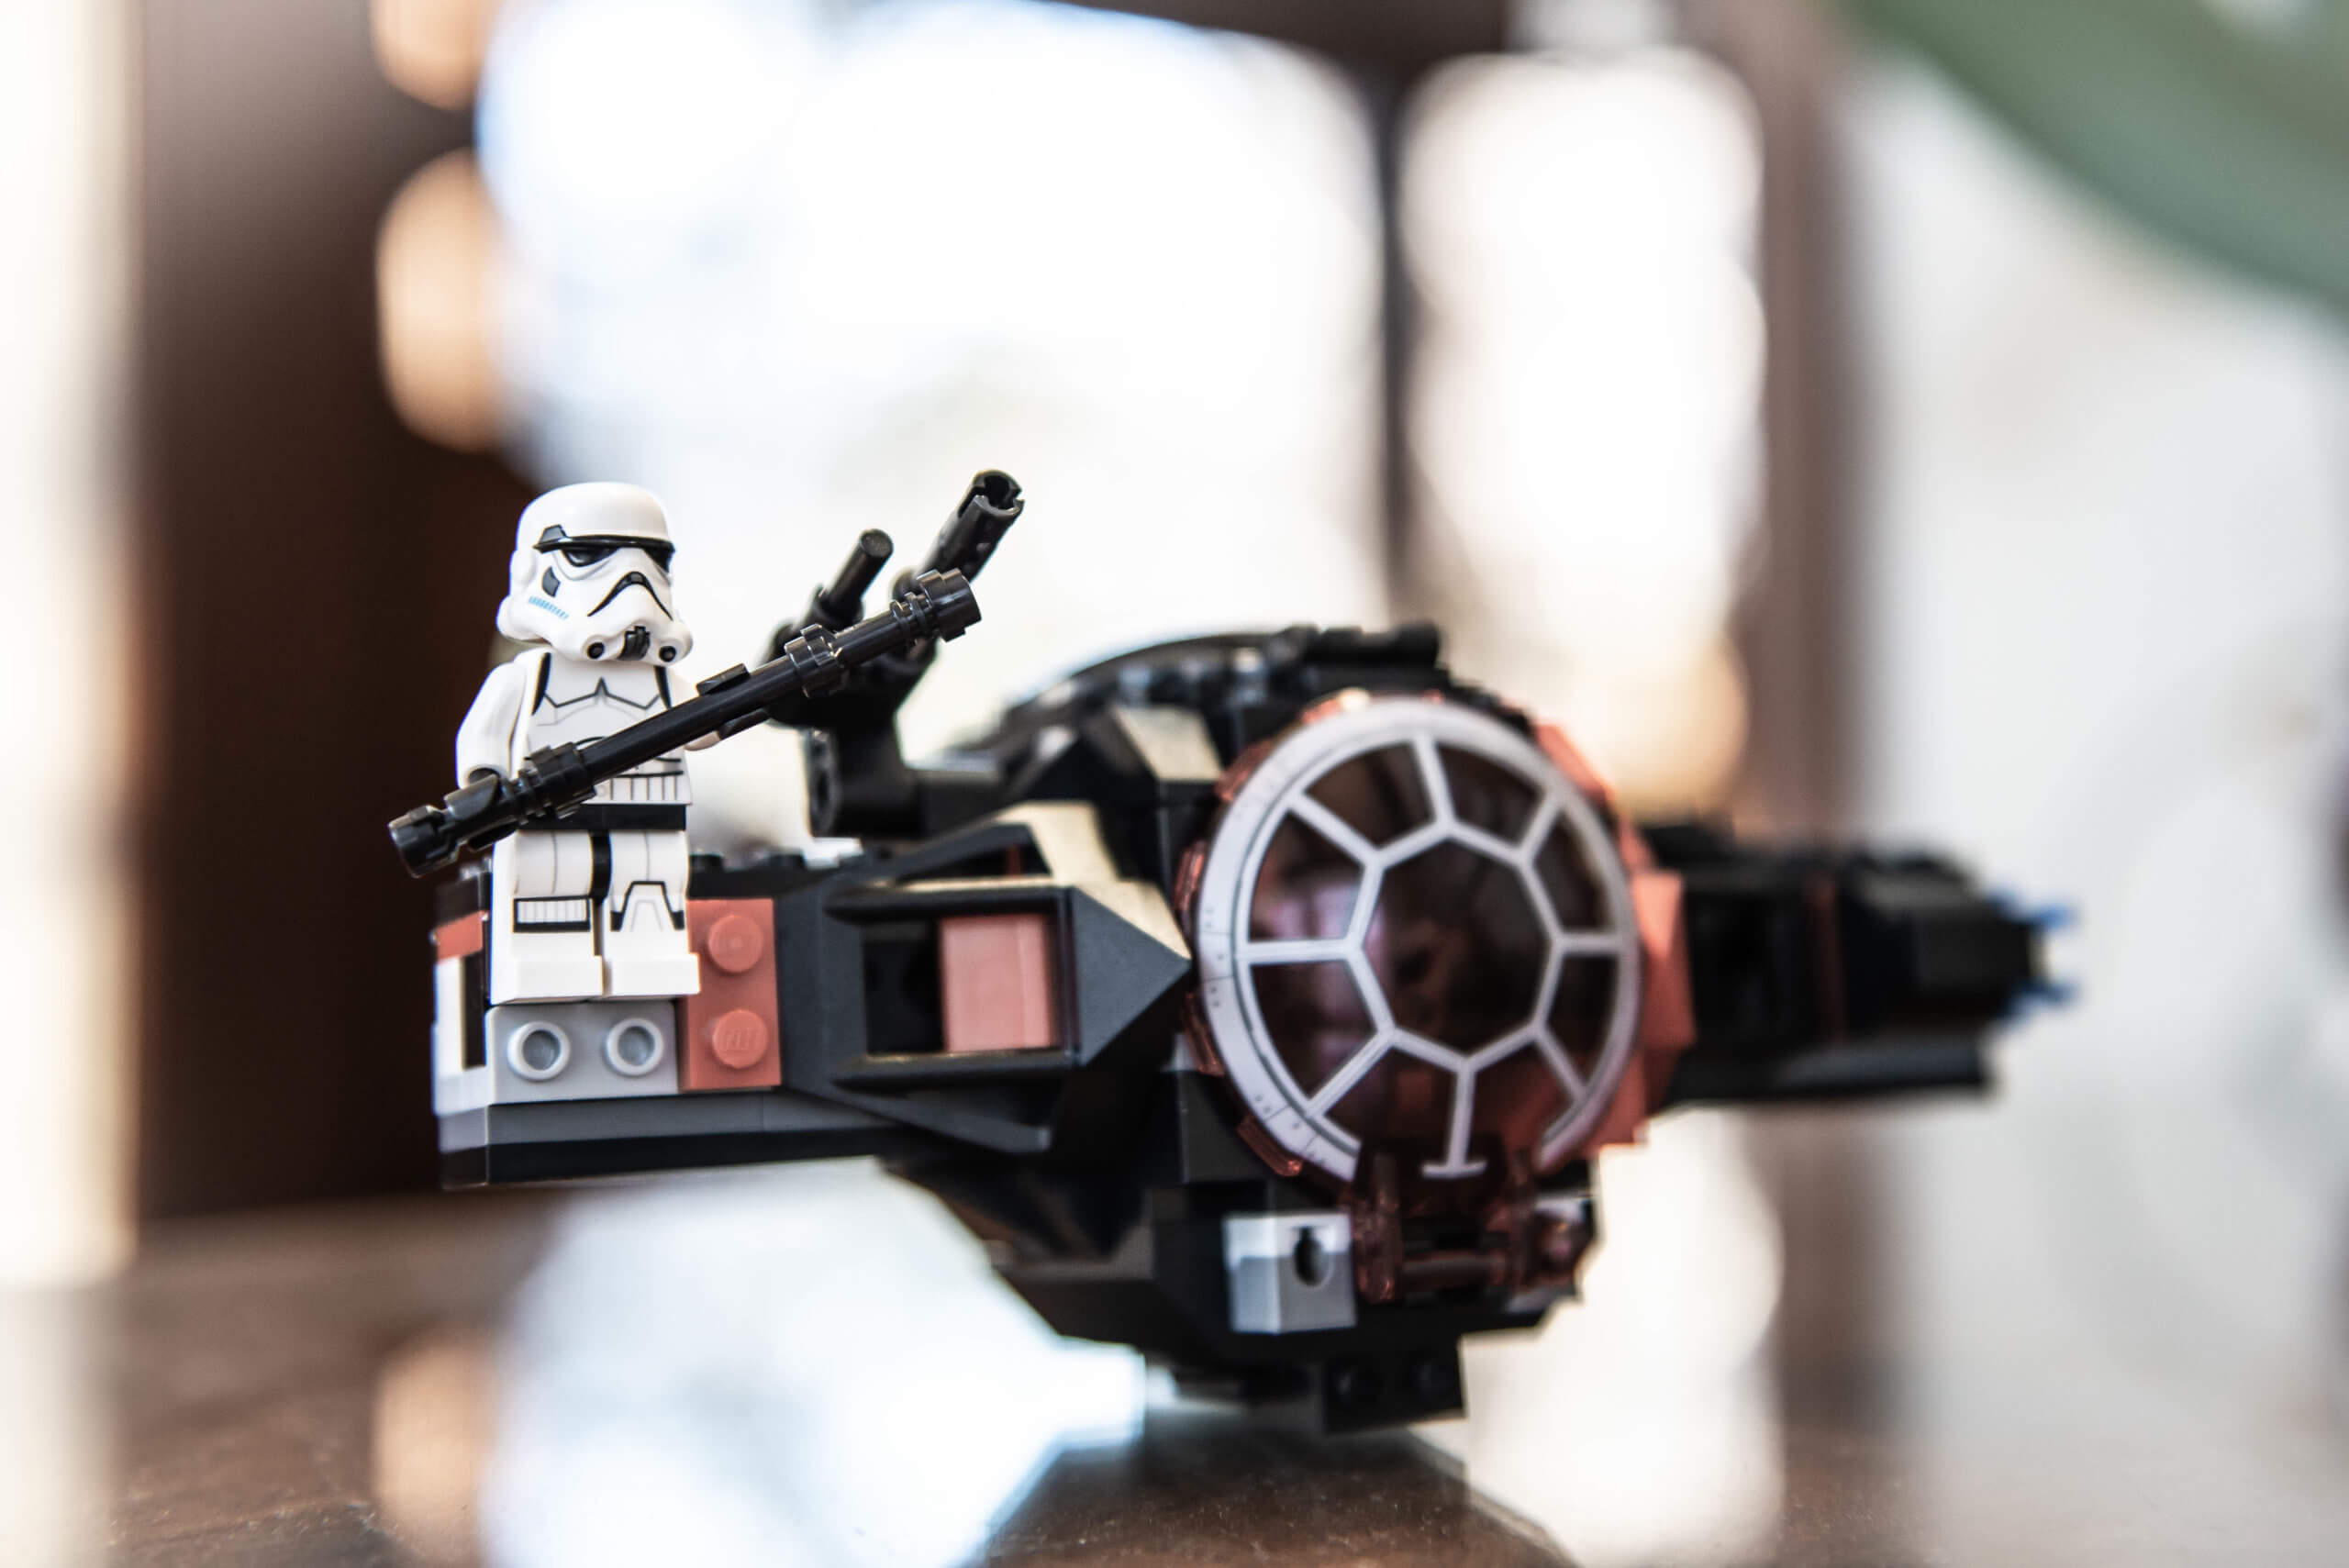 Color image of a Lego Star Wars stormtrooper sitting on the wing of a black Lego TIE fighter spaceship.